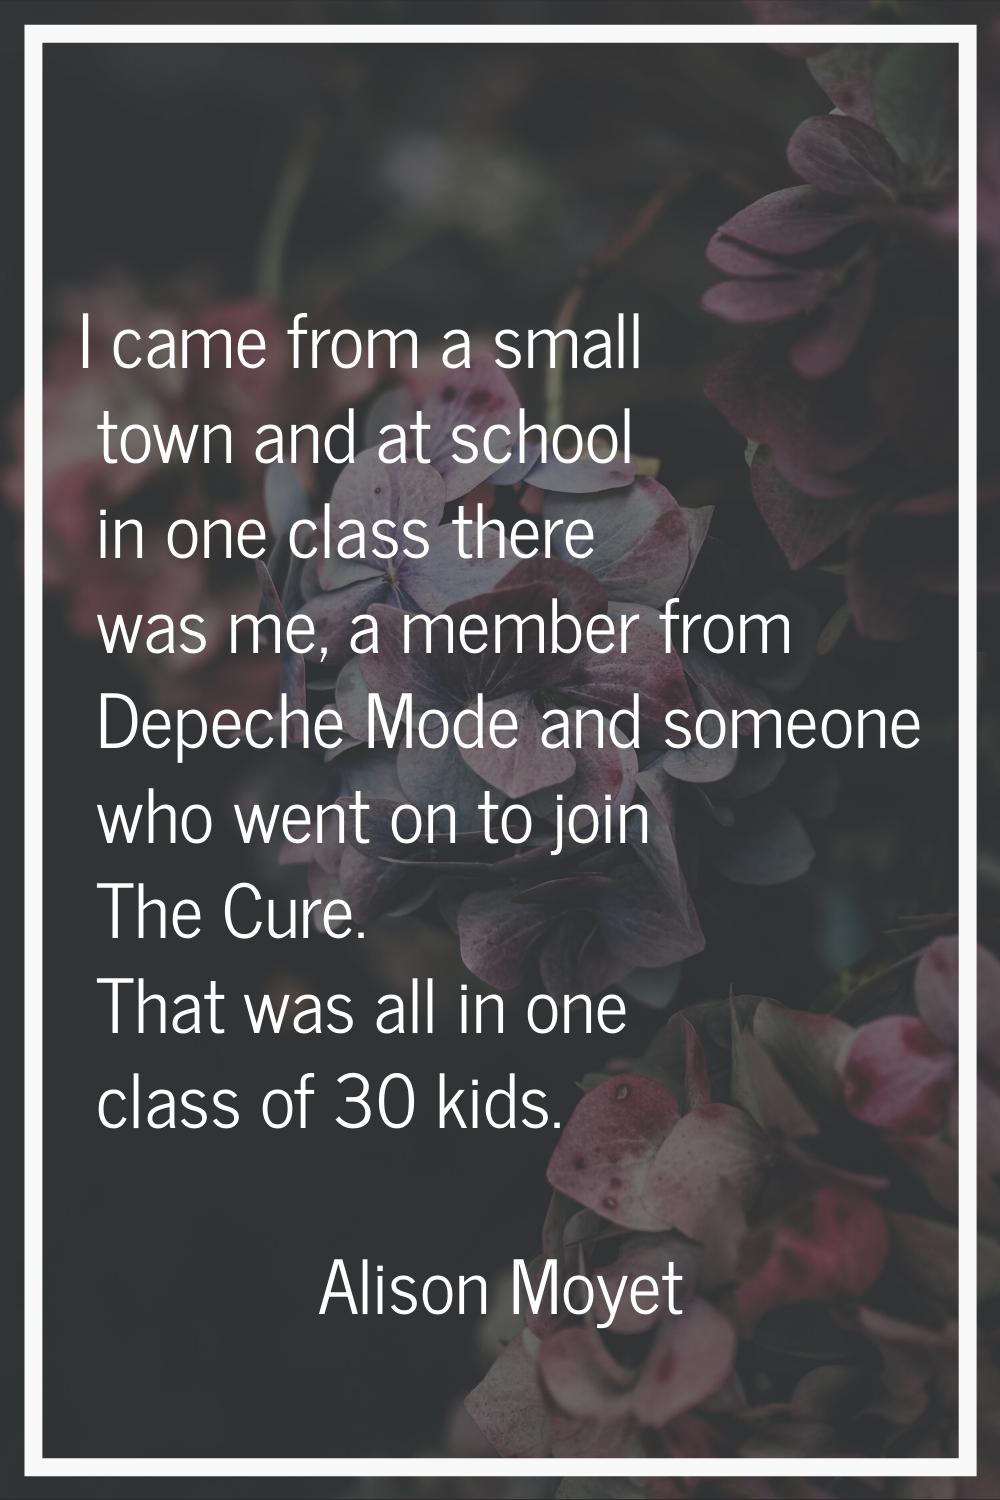 I came from a small town and at school in one class there was me, a member from Depeche Mode and so